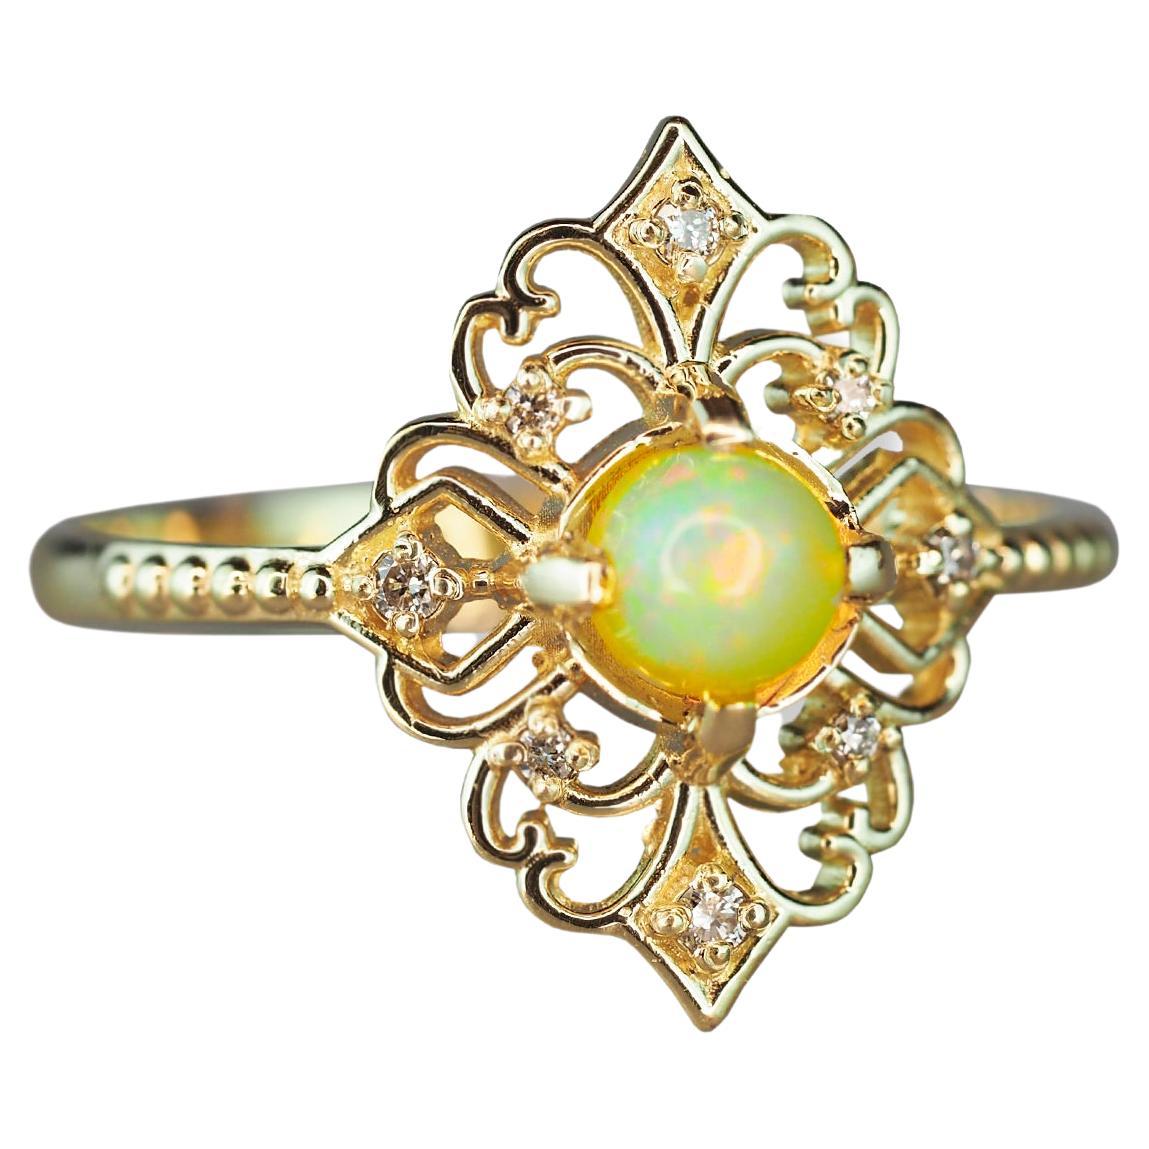 For Sale:  14k Gold Ring with Opal and Diamonds